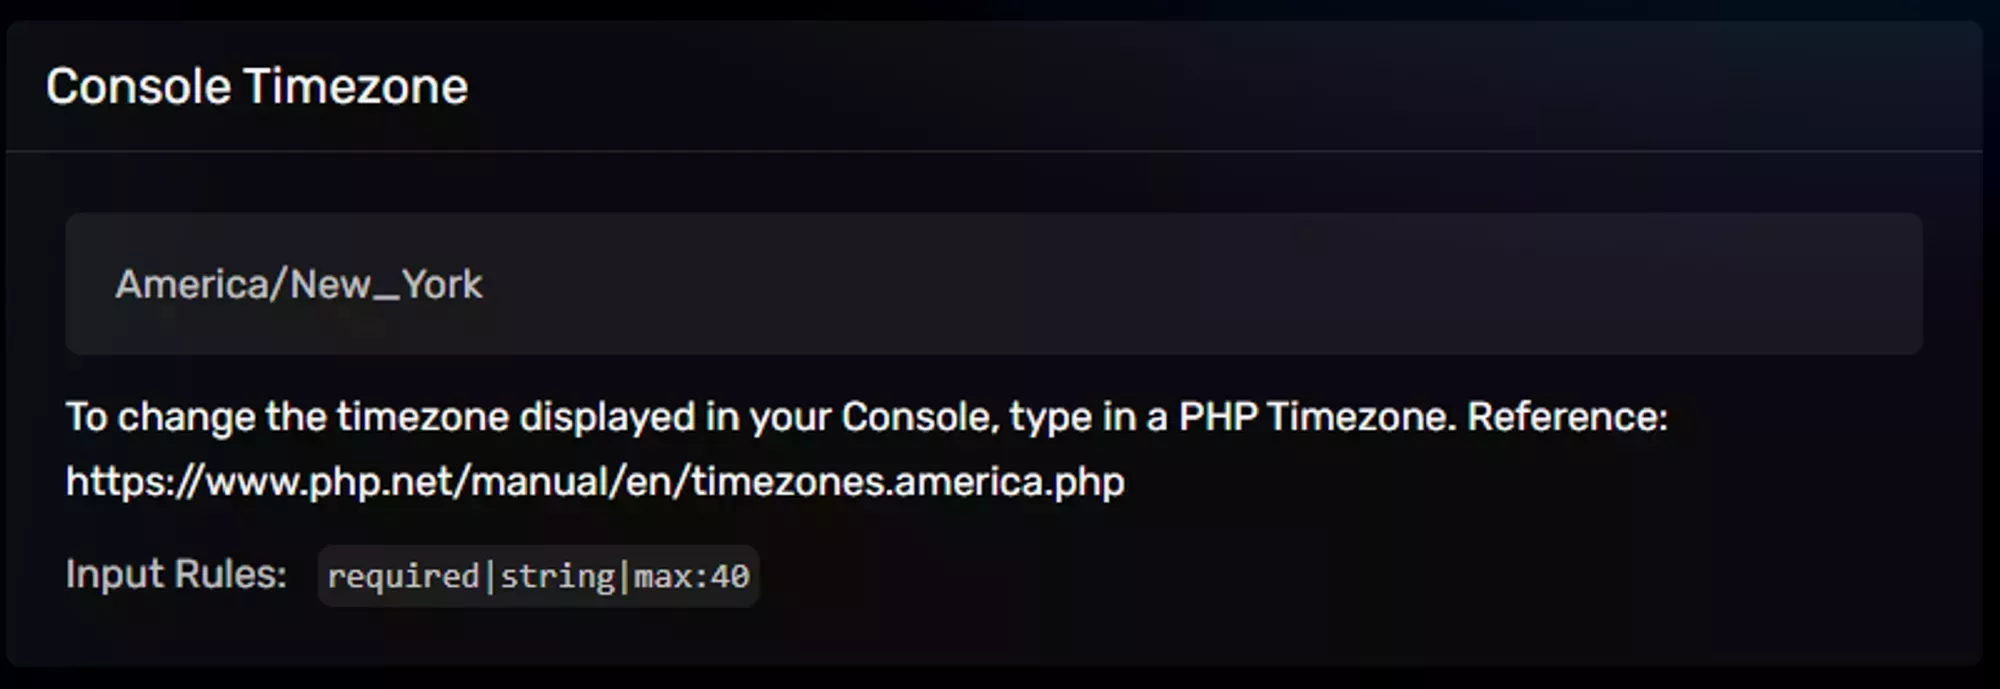 The Console TimeZone Startup Parameter